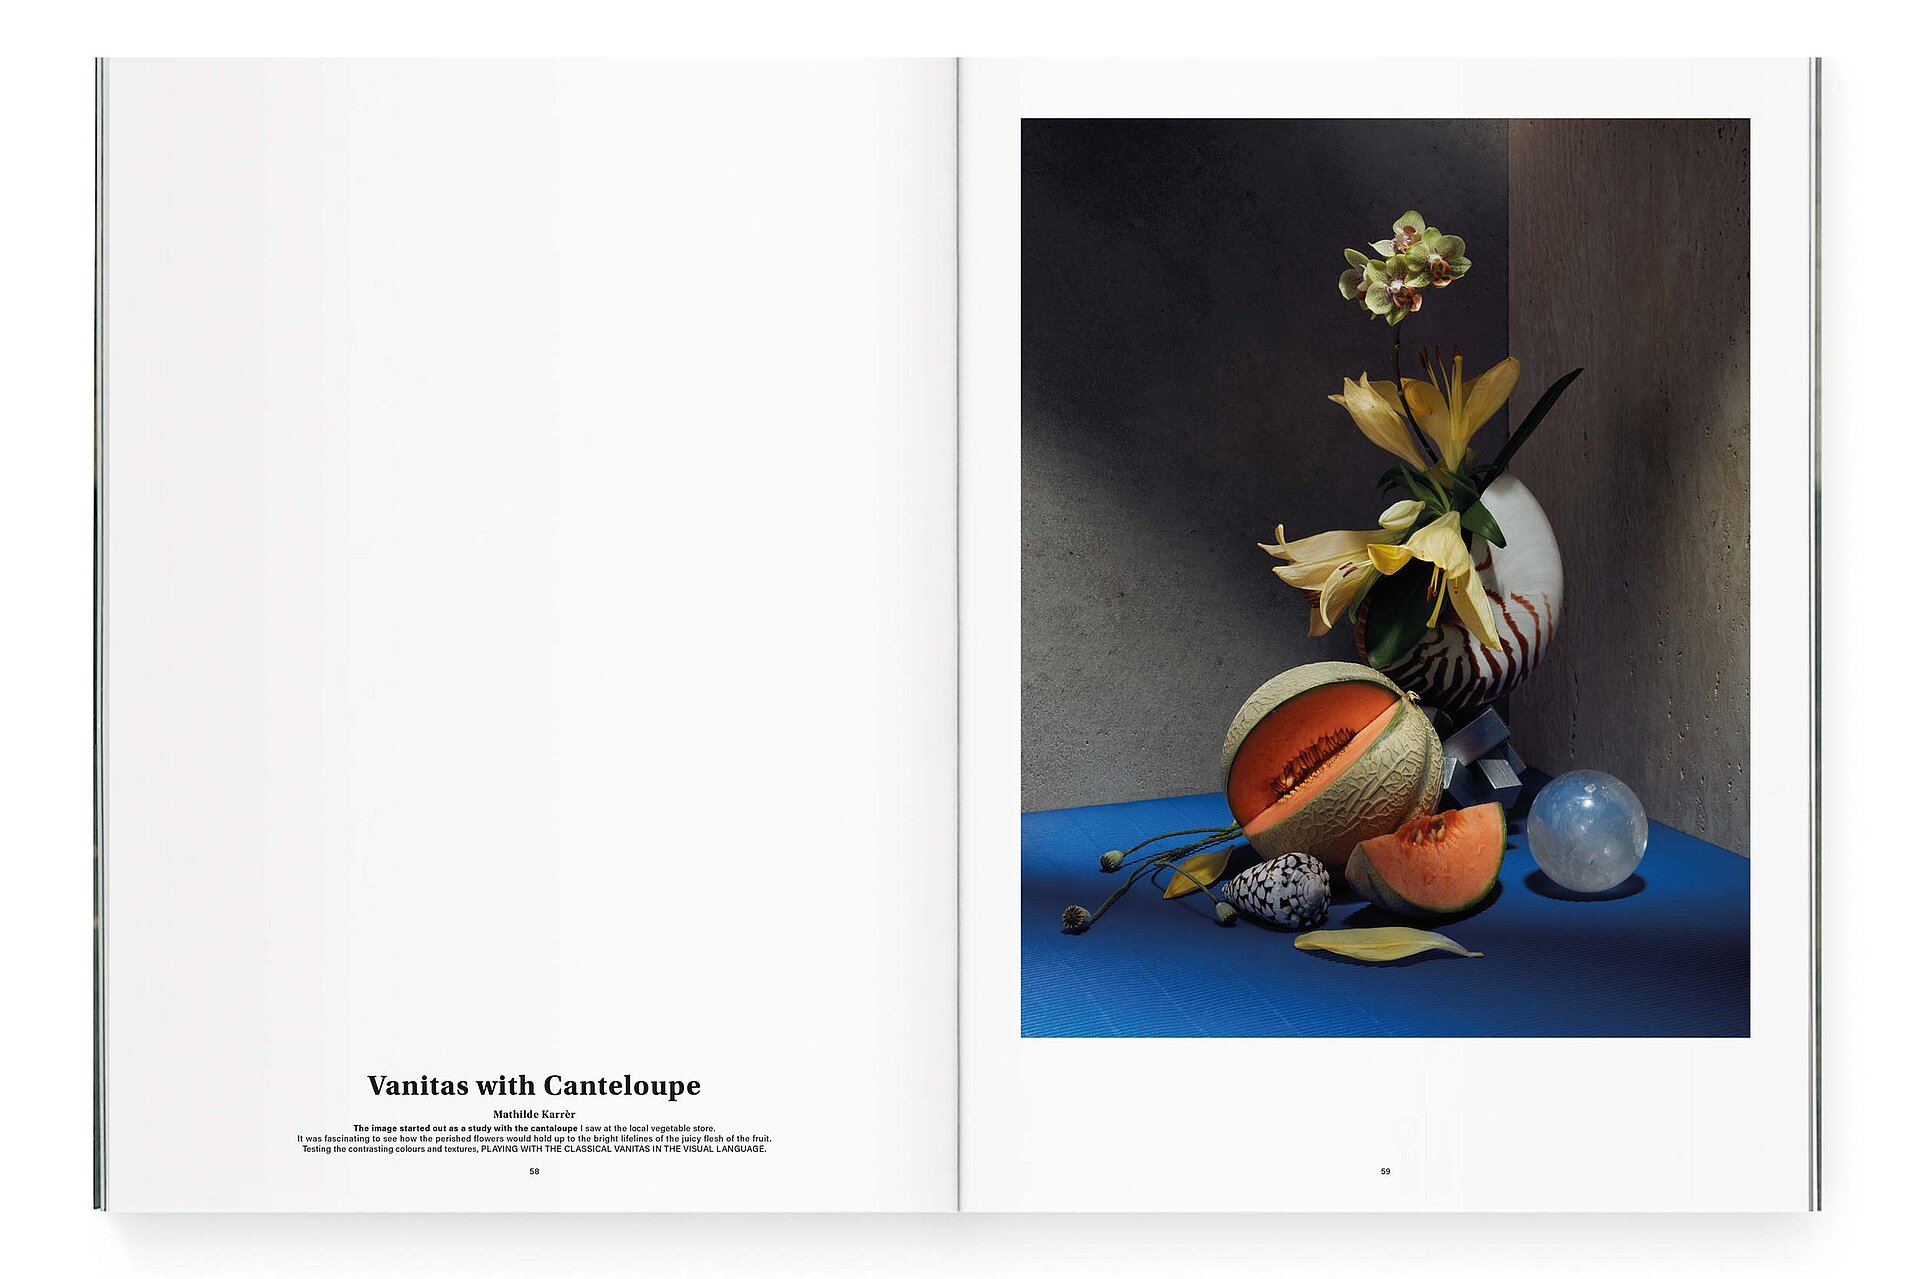 mjr magazine pages with flowers and fruits design bern